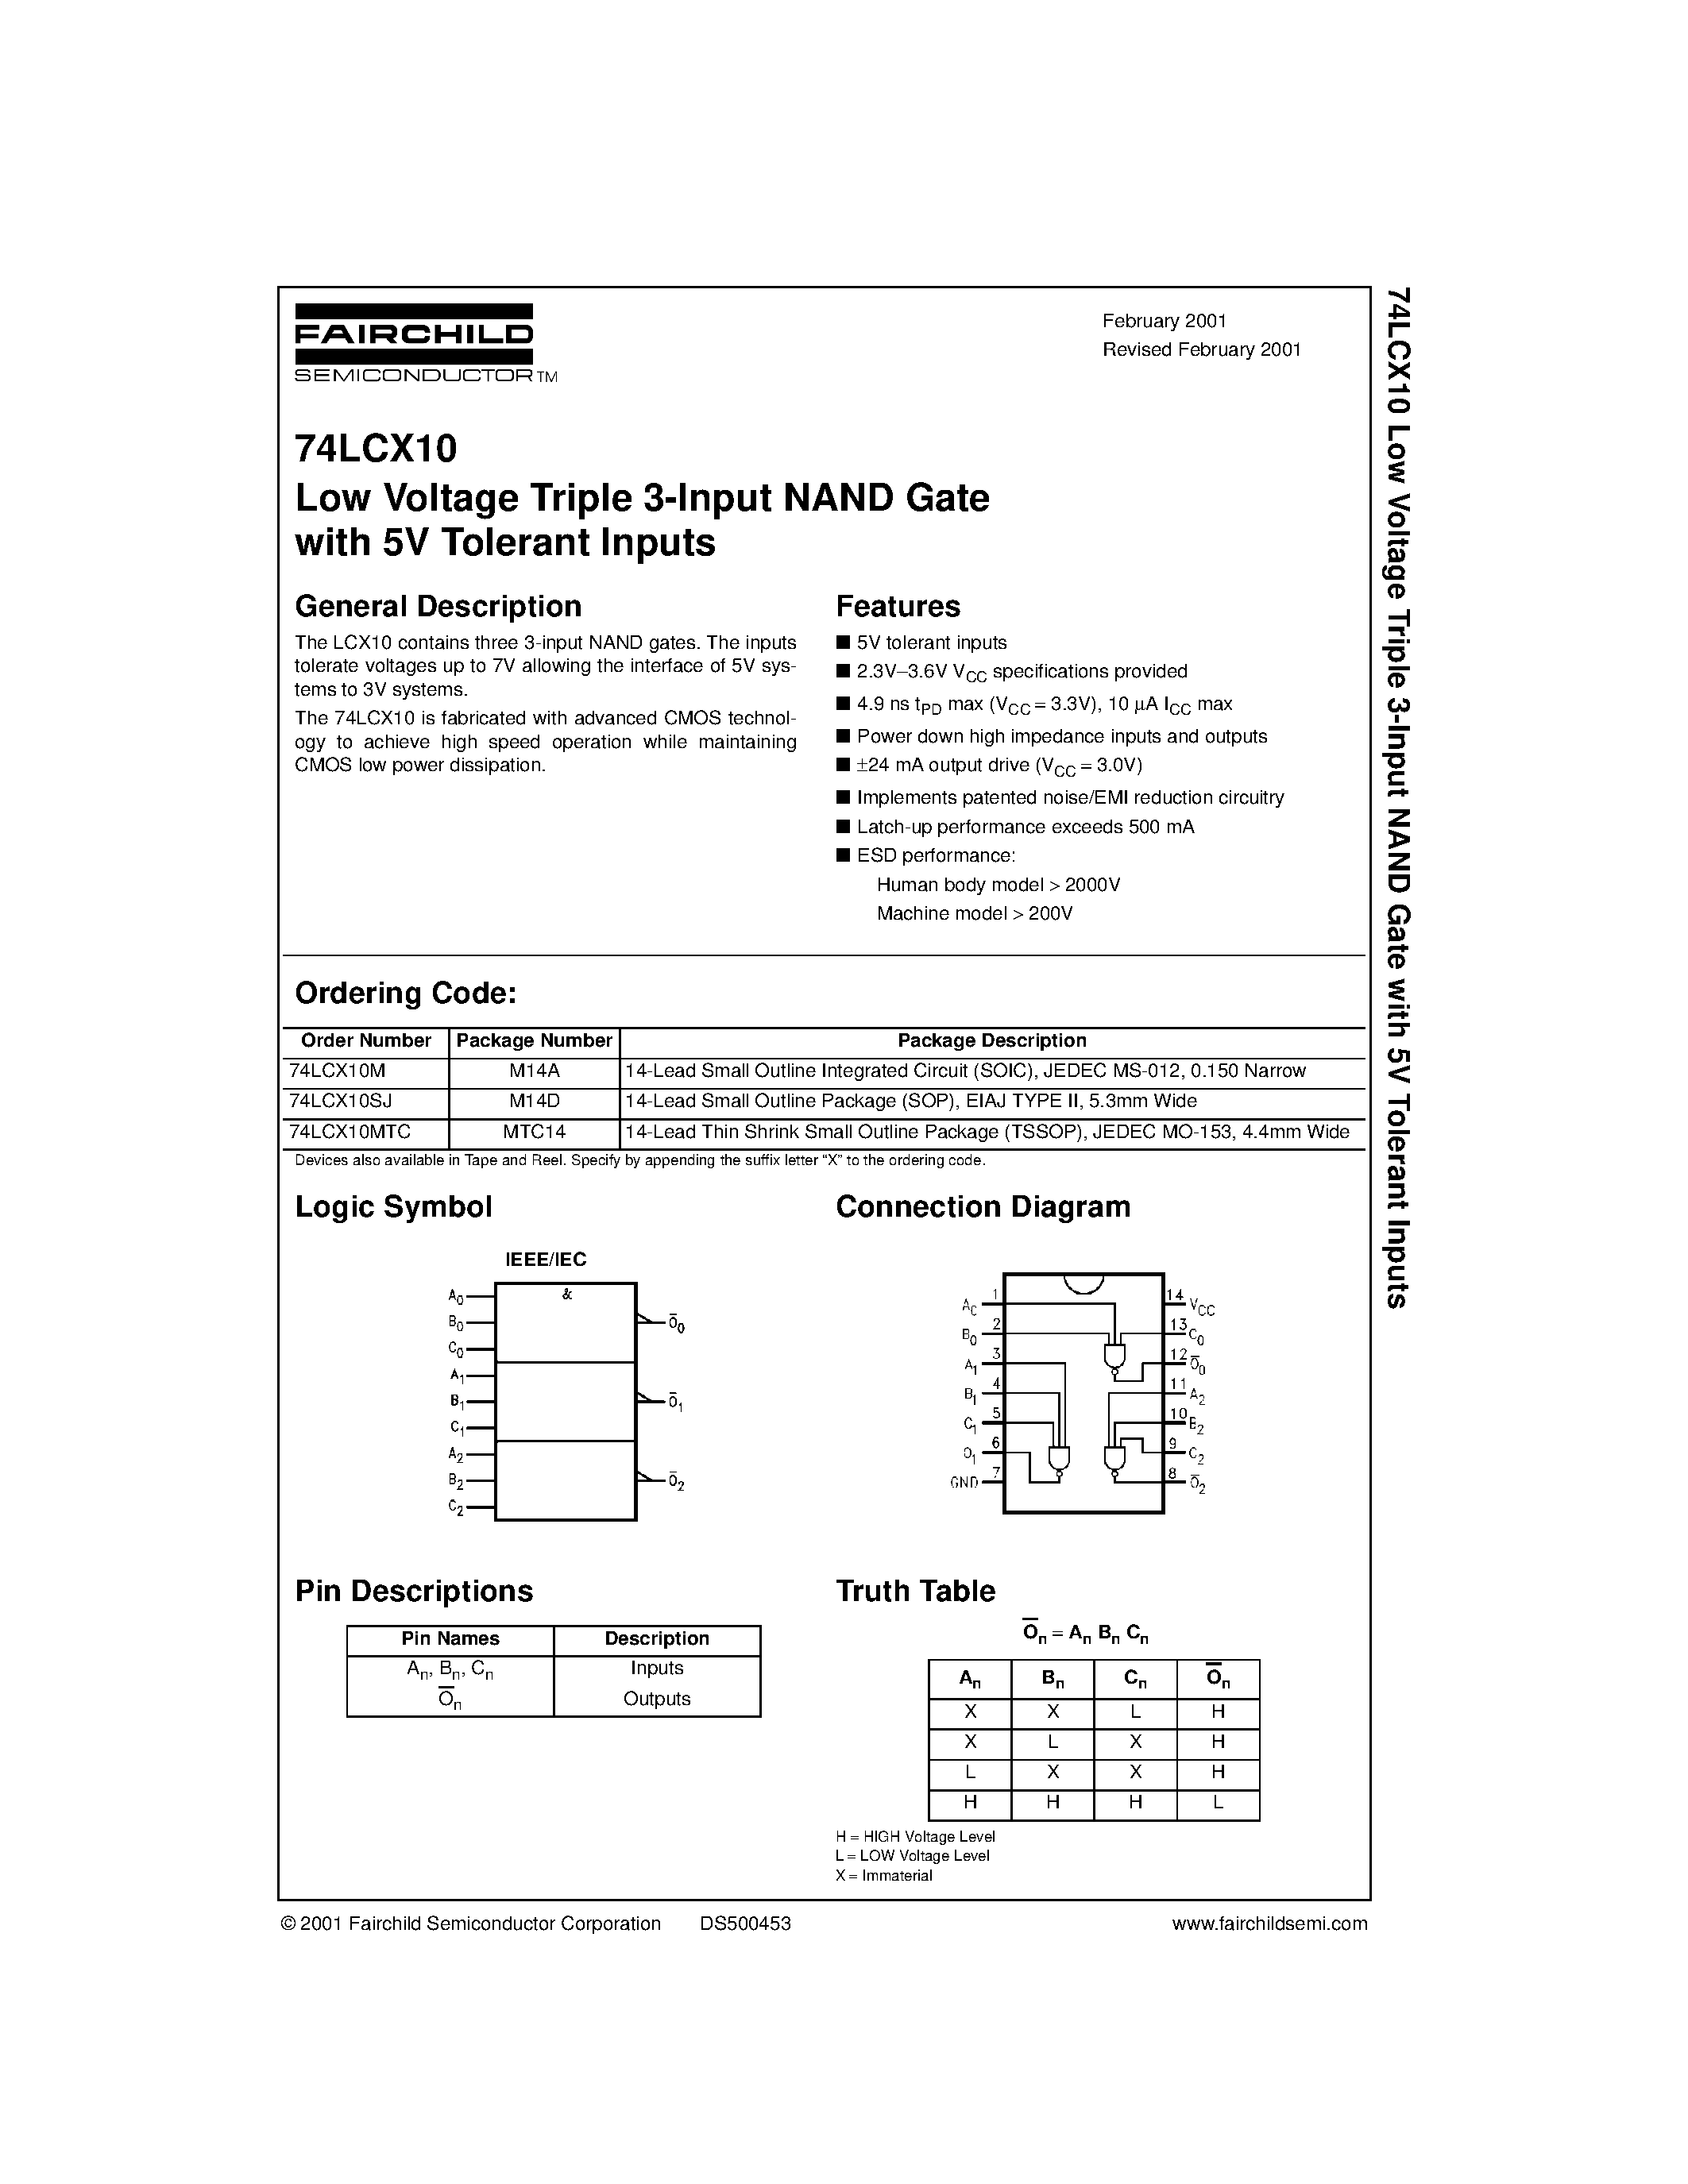 Datasheet 74LCX10M - Low Voltage Triple 3-Input NAND Gate with 5V Tolerant Inputs page 1